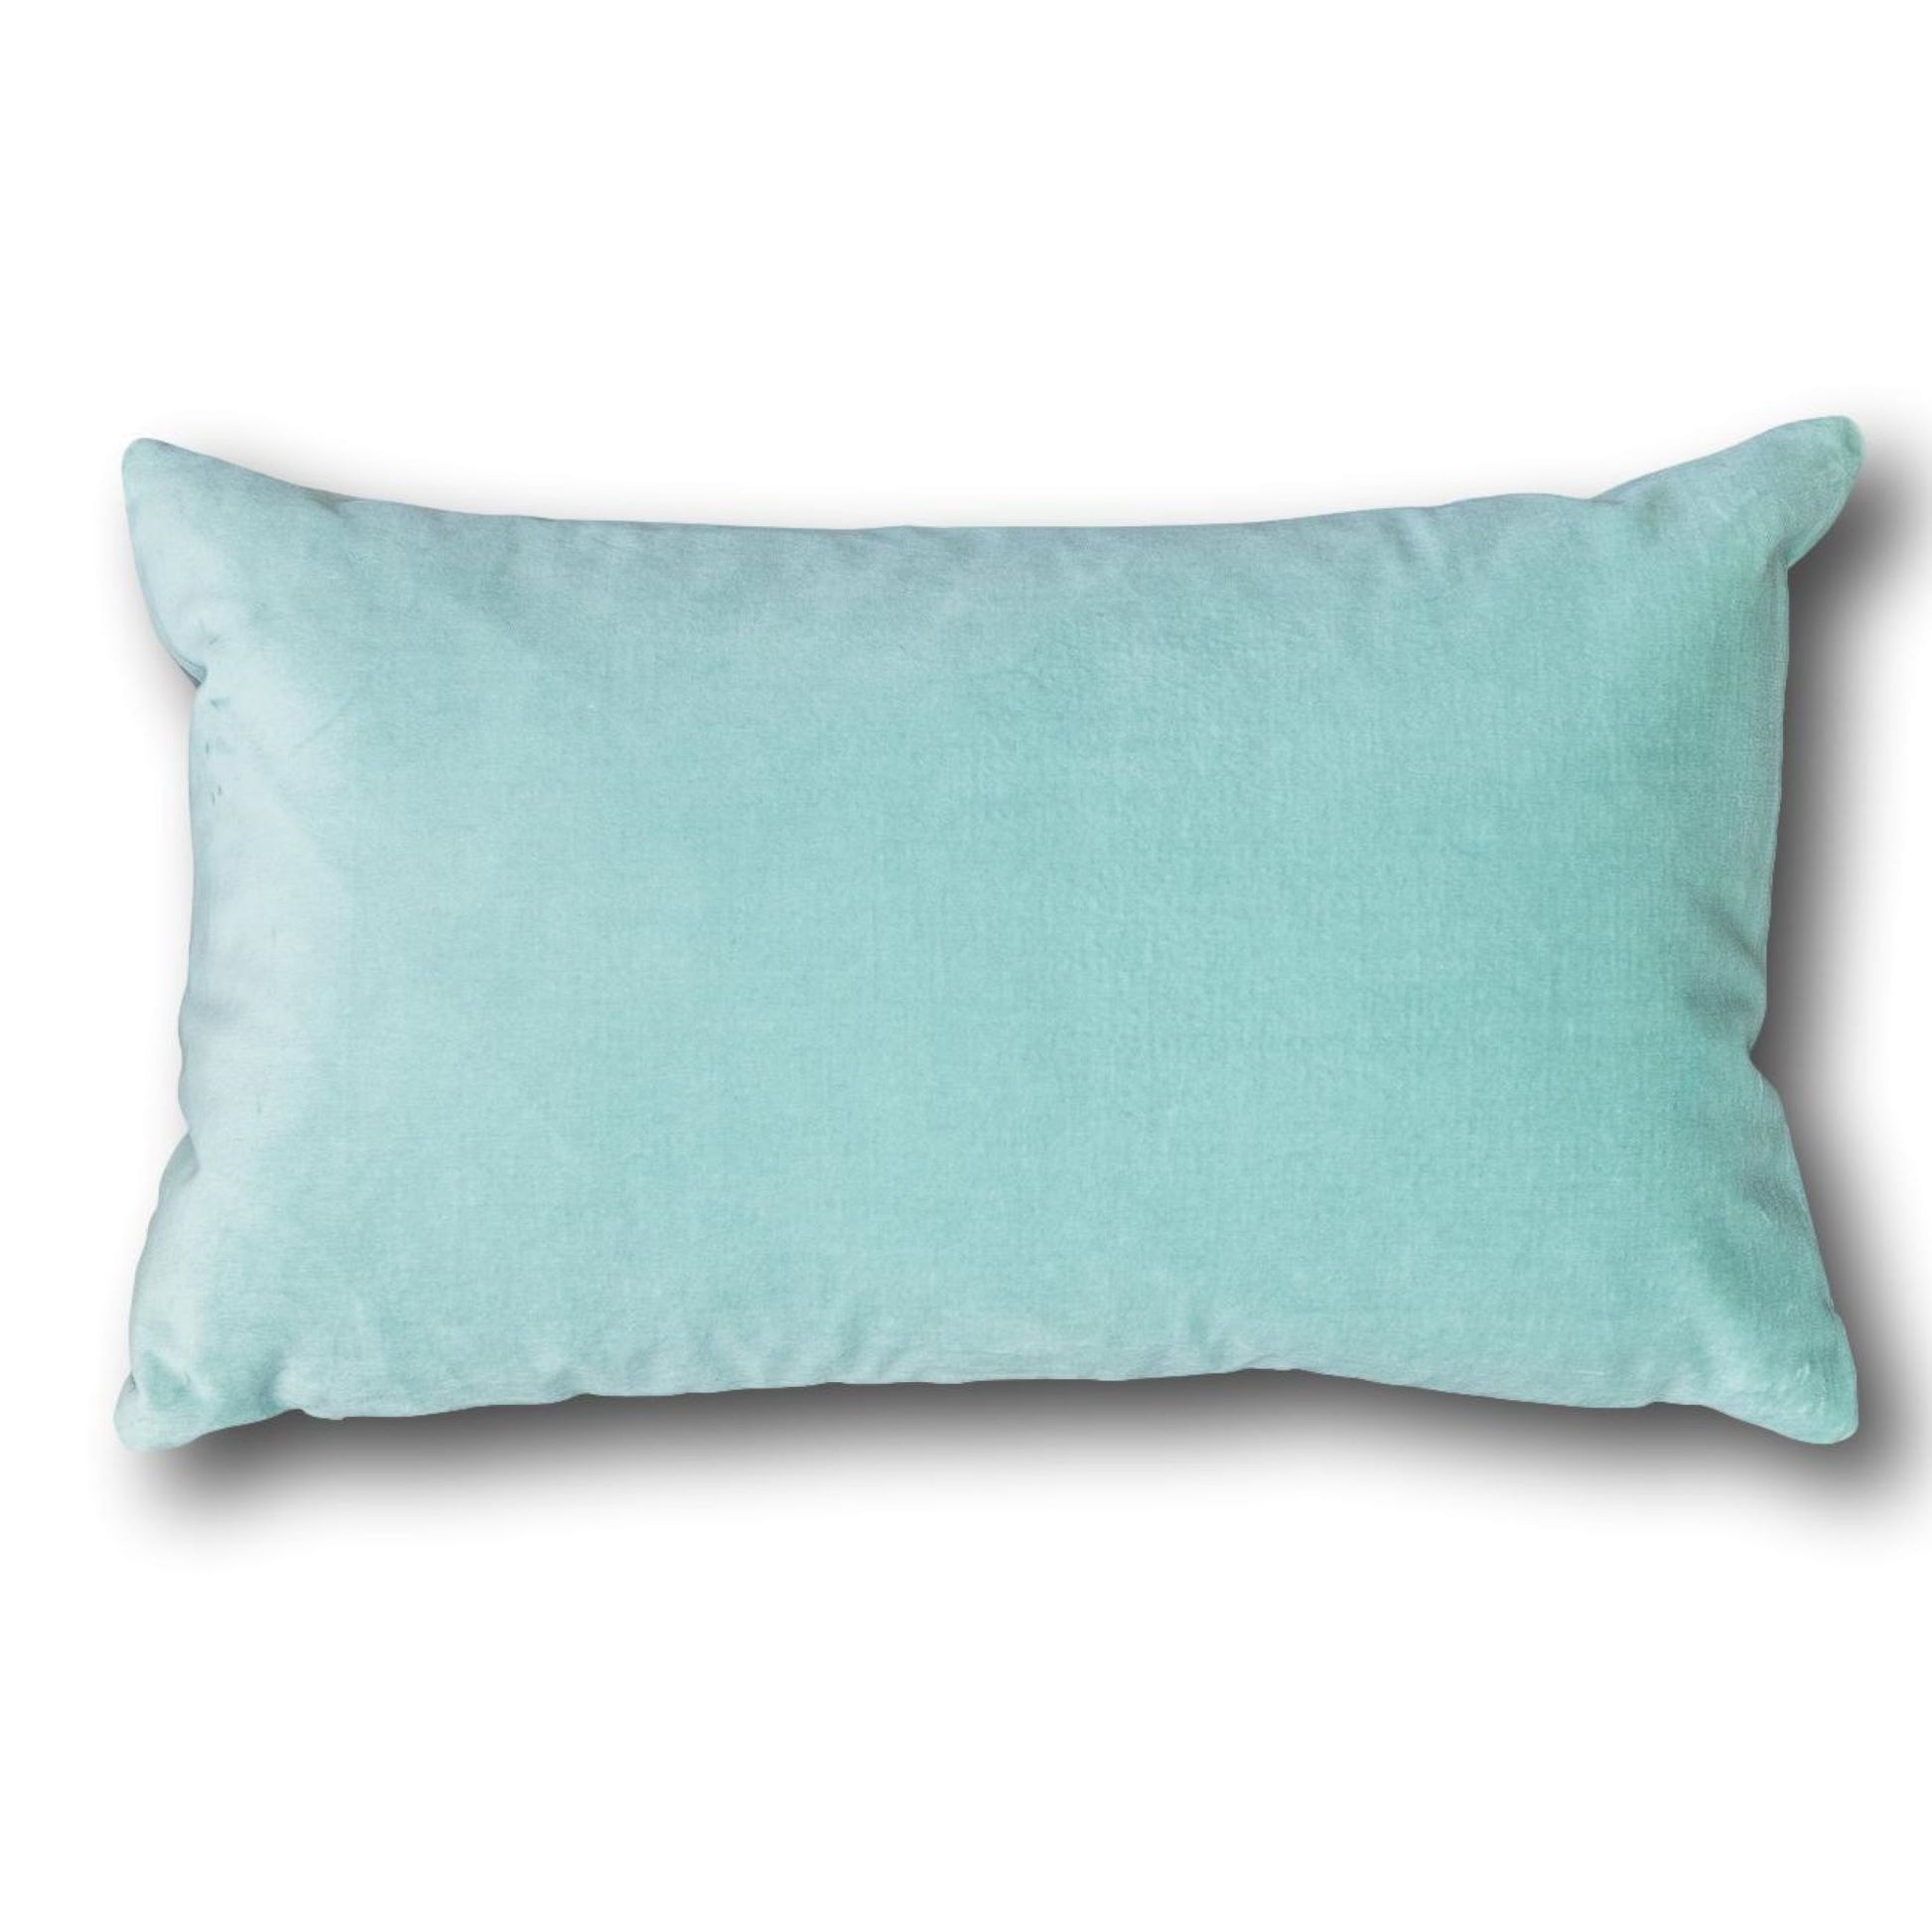 luxury duck egg blue cushions luxe 39